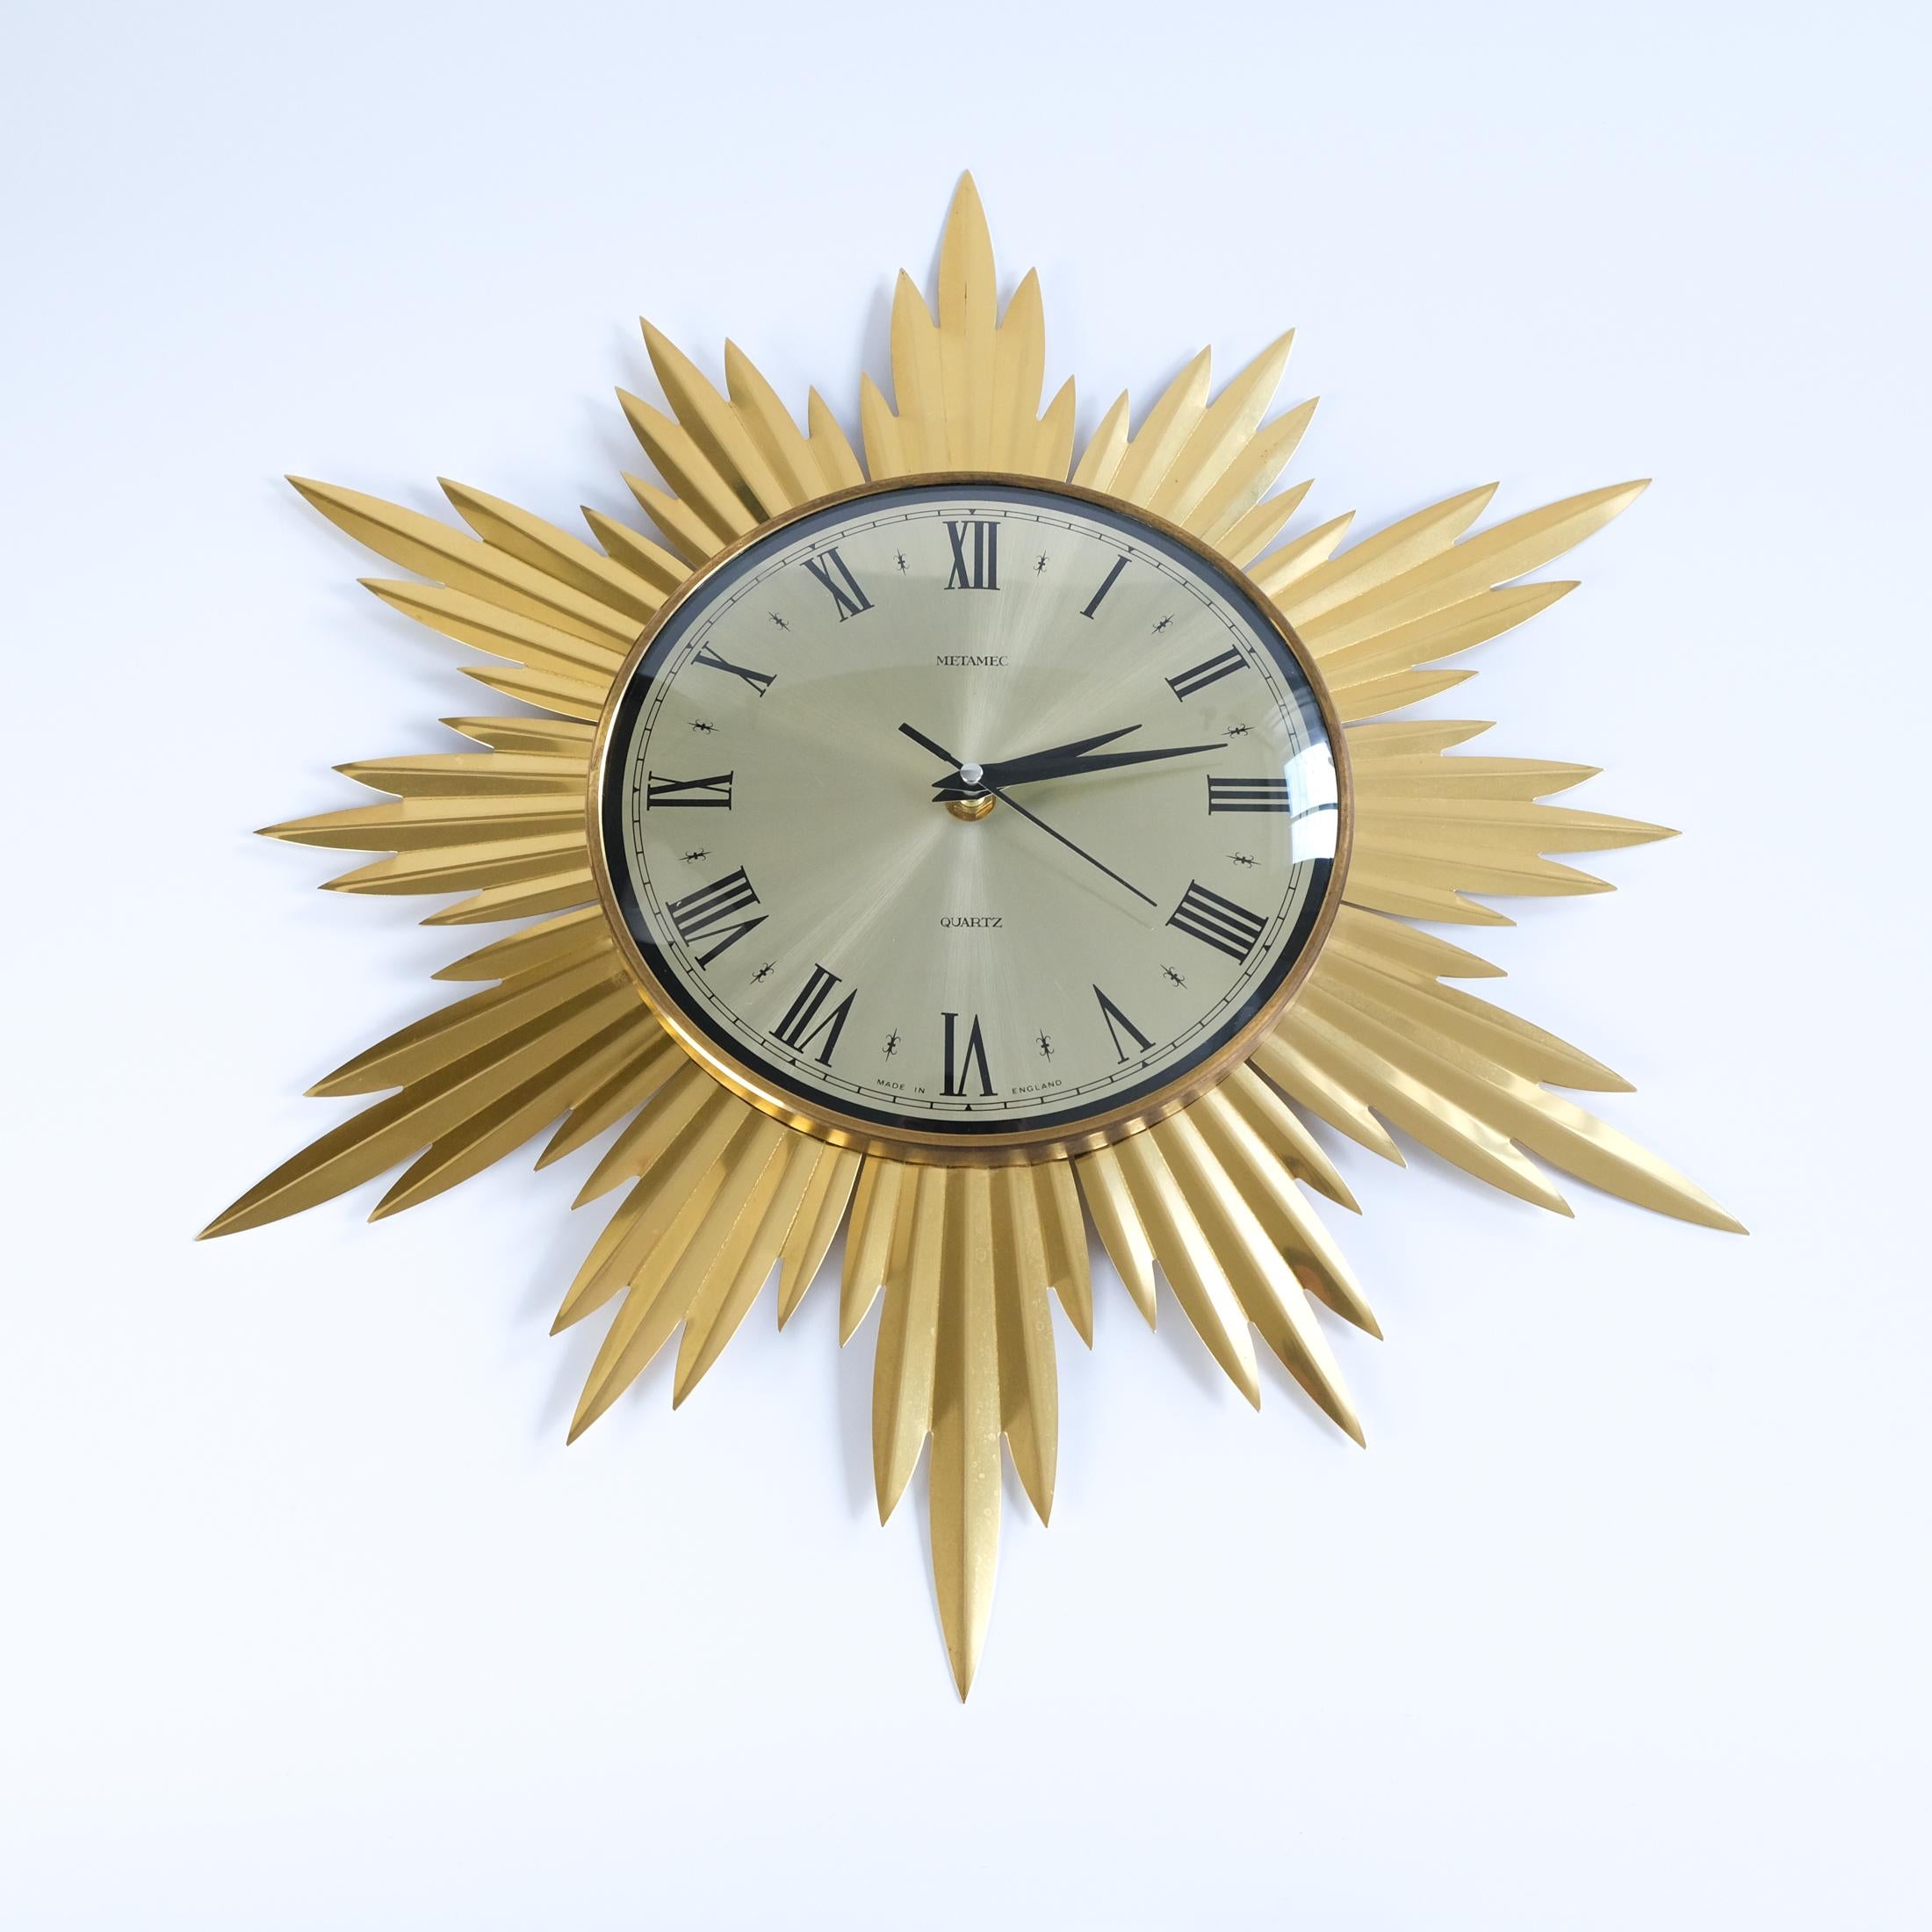 For sale is a Mid-Century Modernist ‘Starburst’ or 'Sunburst' wall clock by Metamec, England and dating from the 1960s.

The clock keeps good time and is in good vintage condition, with wear and patina commensurate with age, which includes some